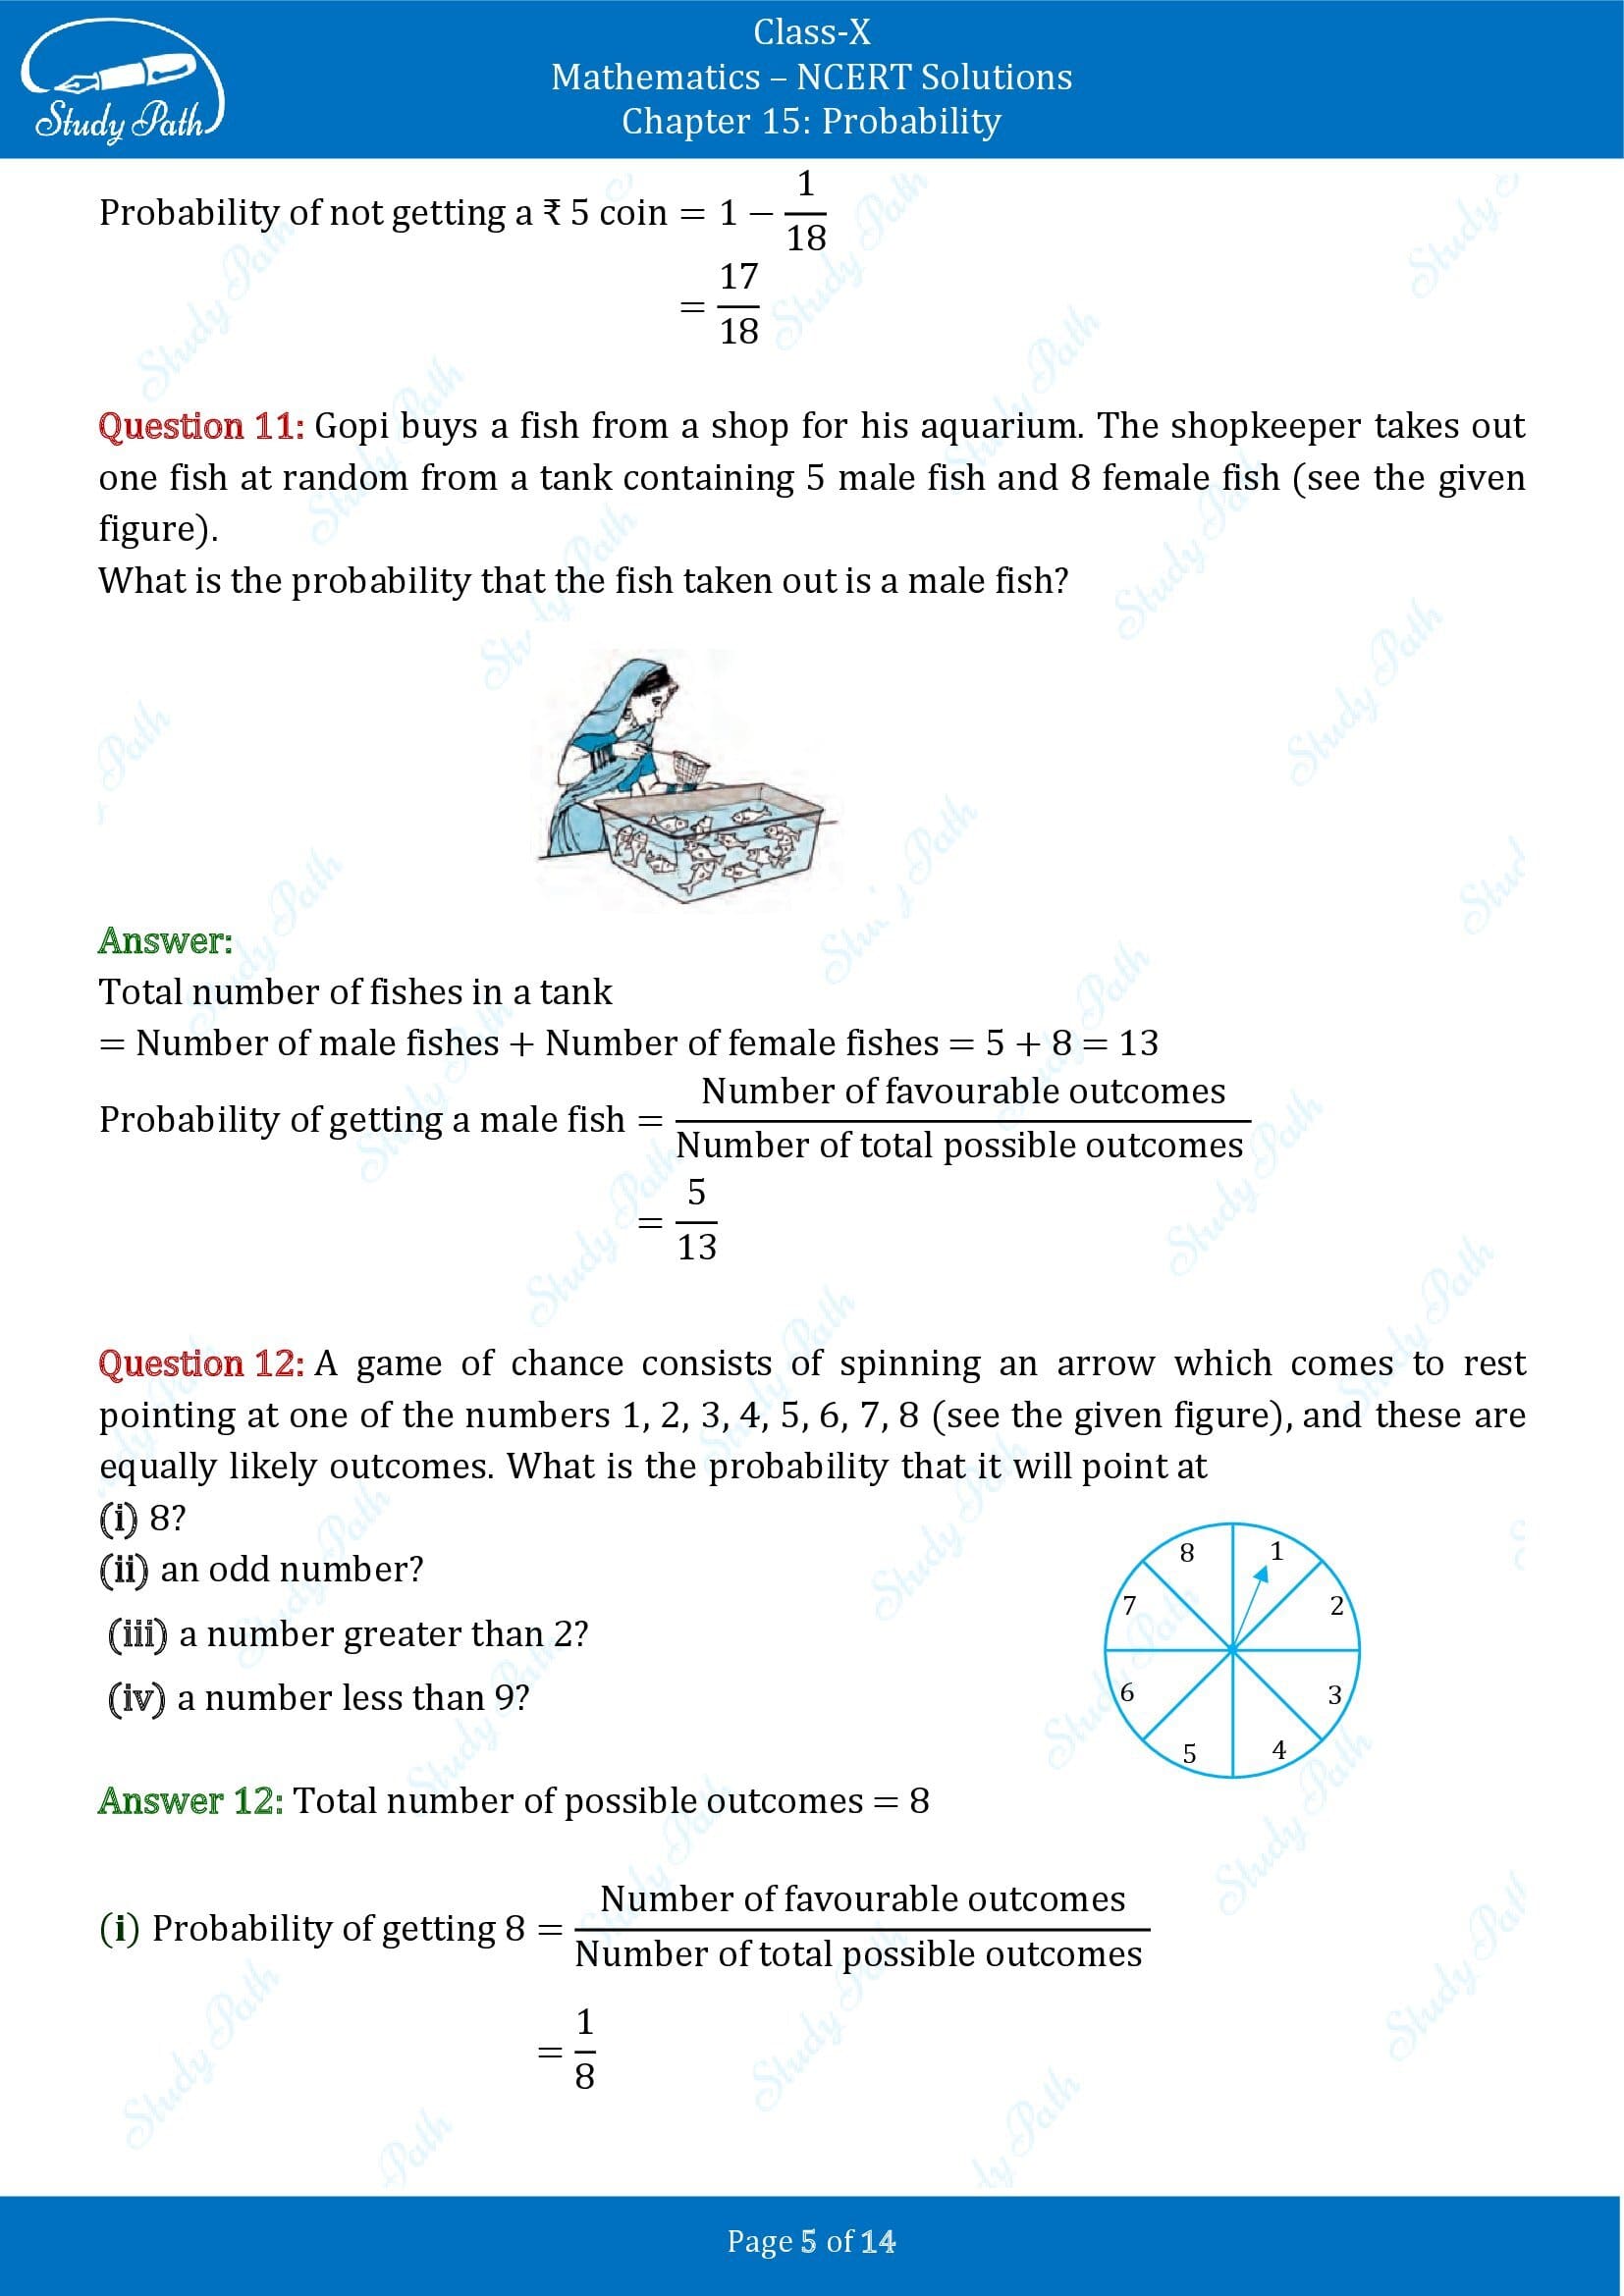 NCERT Solutions for Class 10 Maths Chapter 15 Probability Exercise 15.1 00005